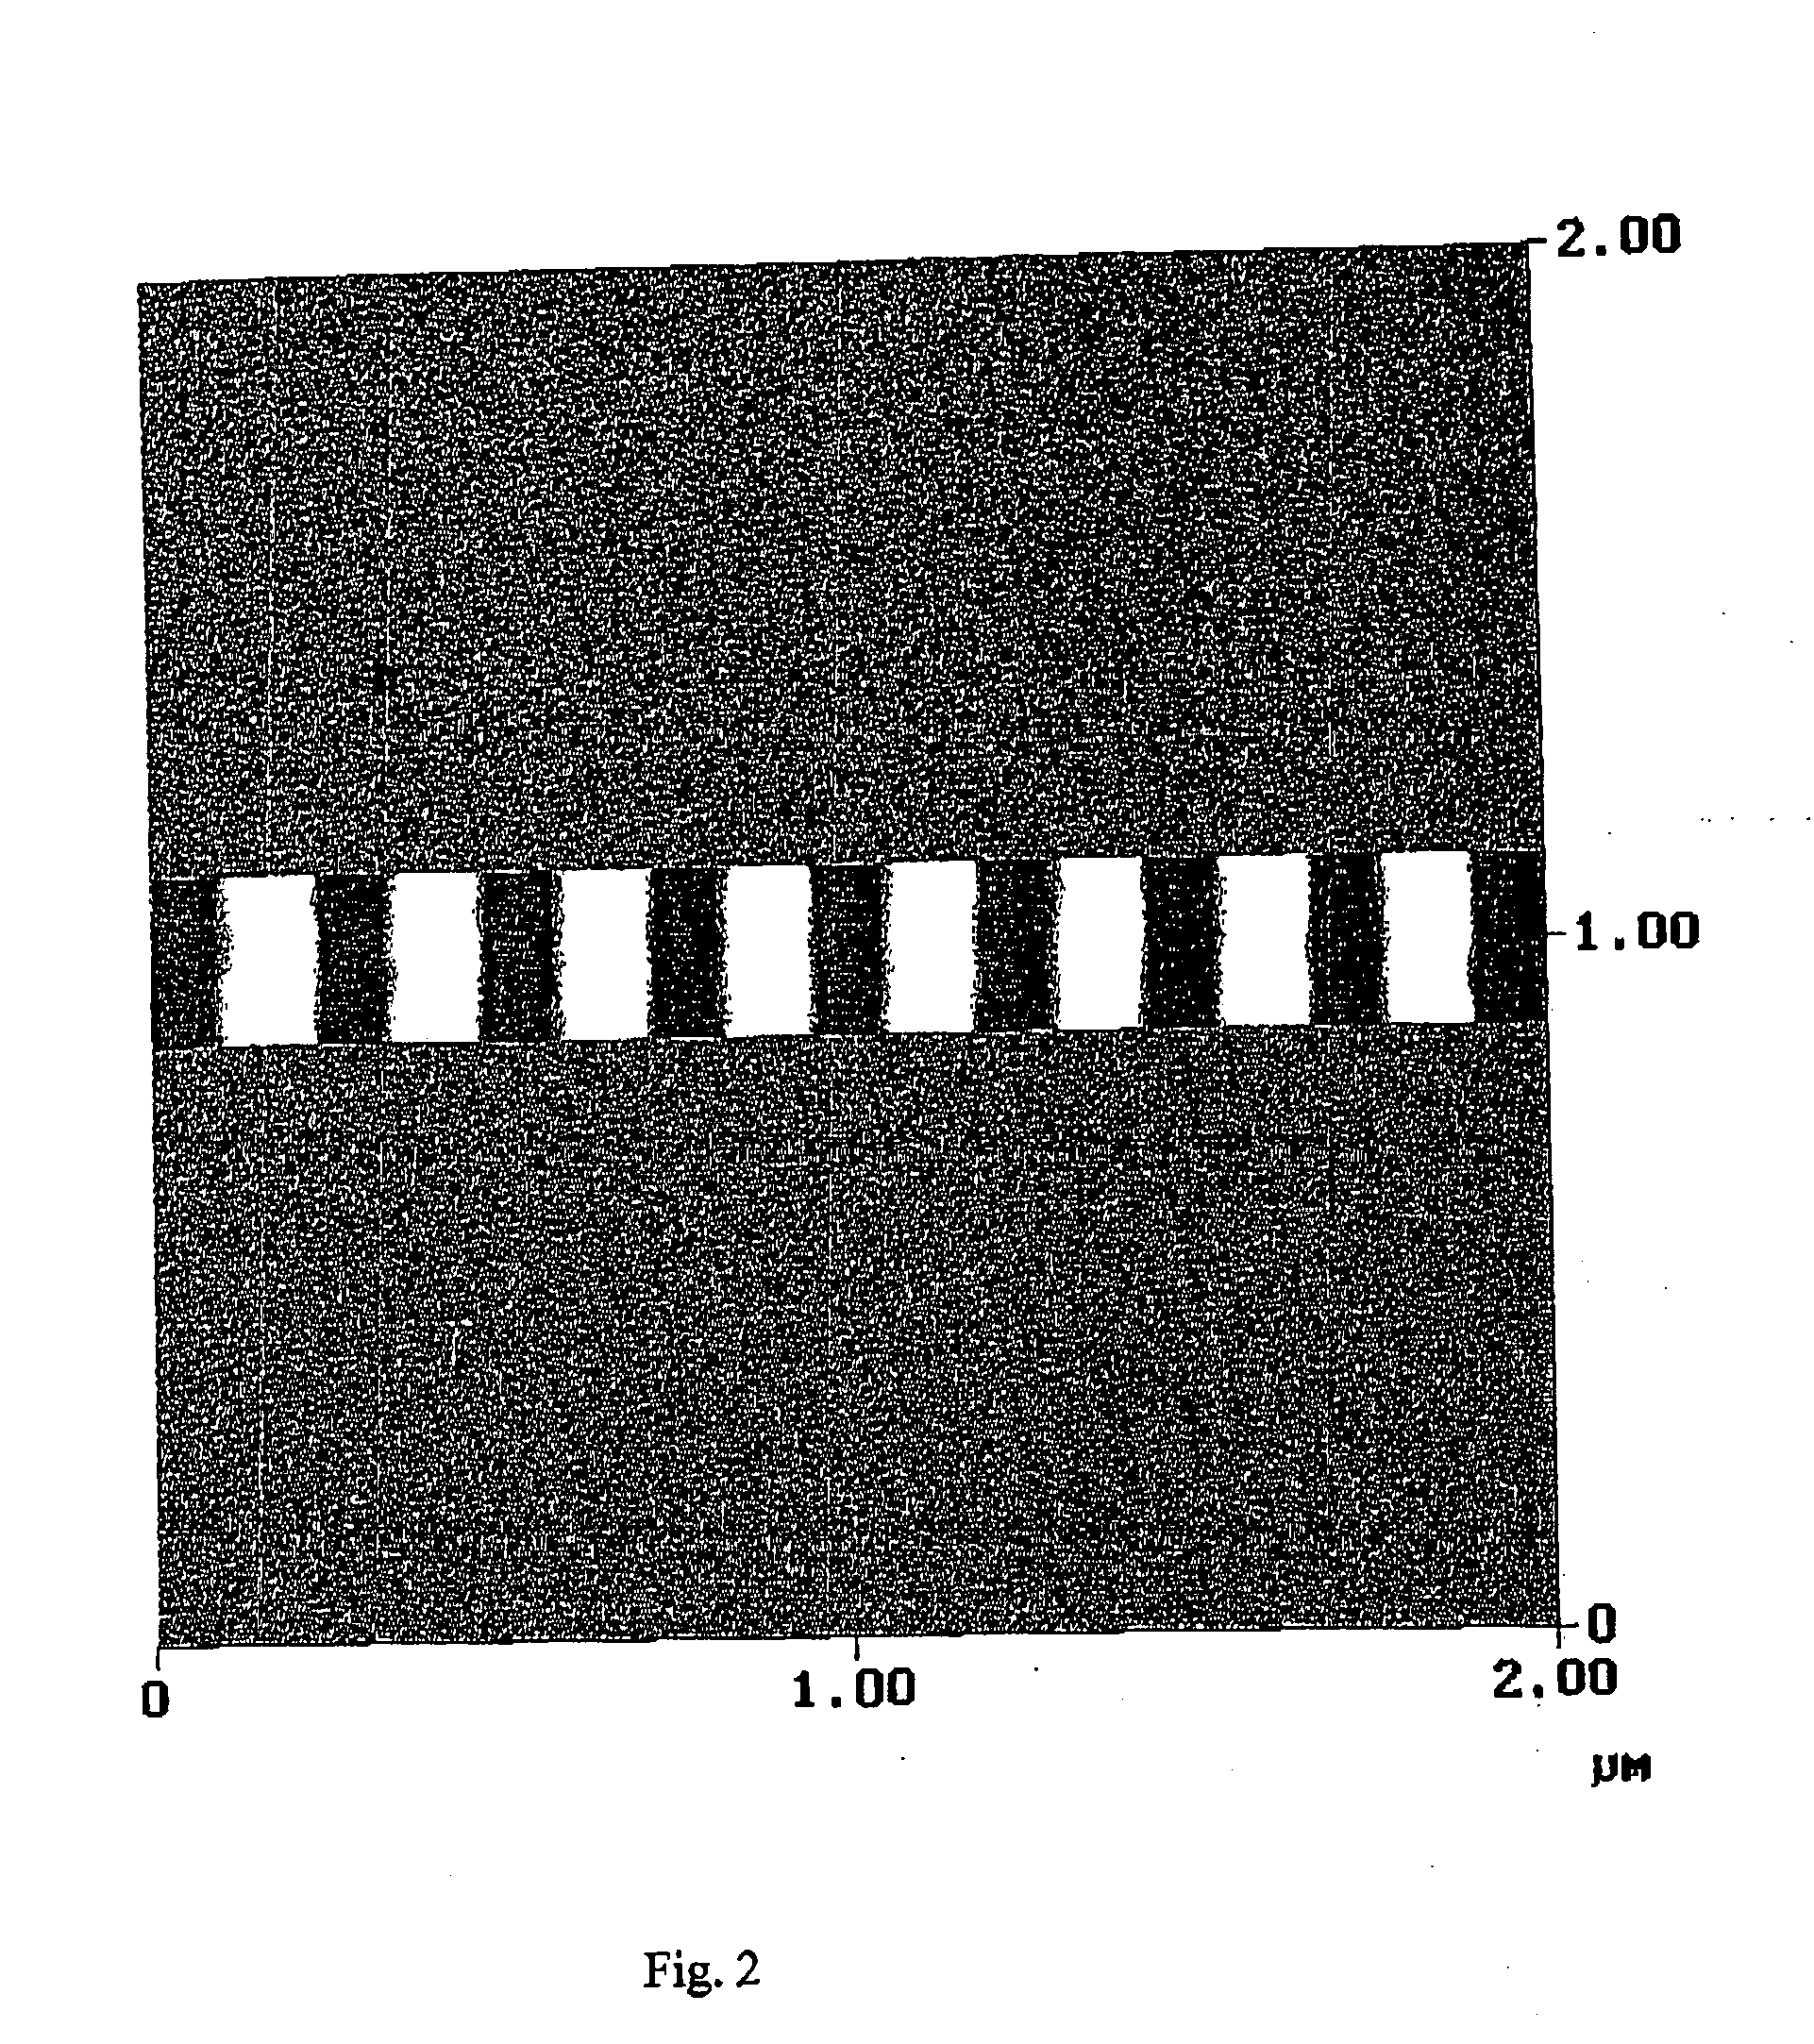 Imprint stamp comprising Cyclic Olefin copolymer